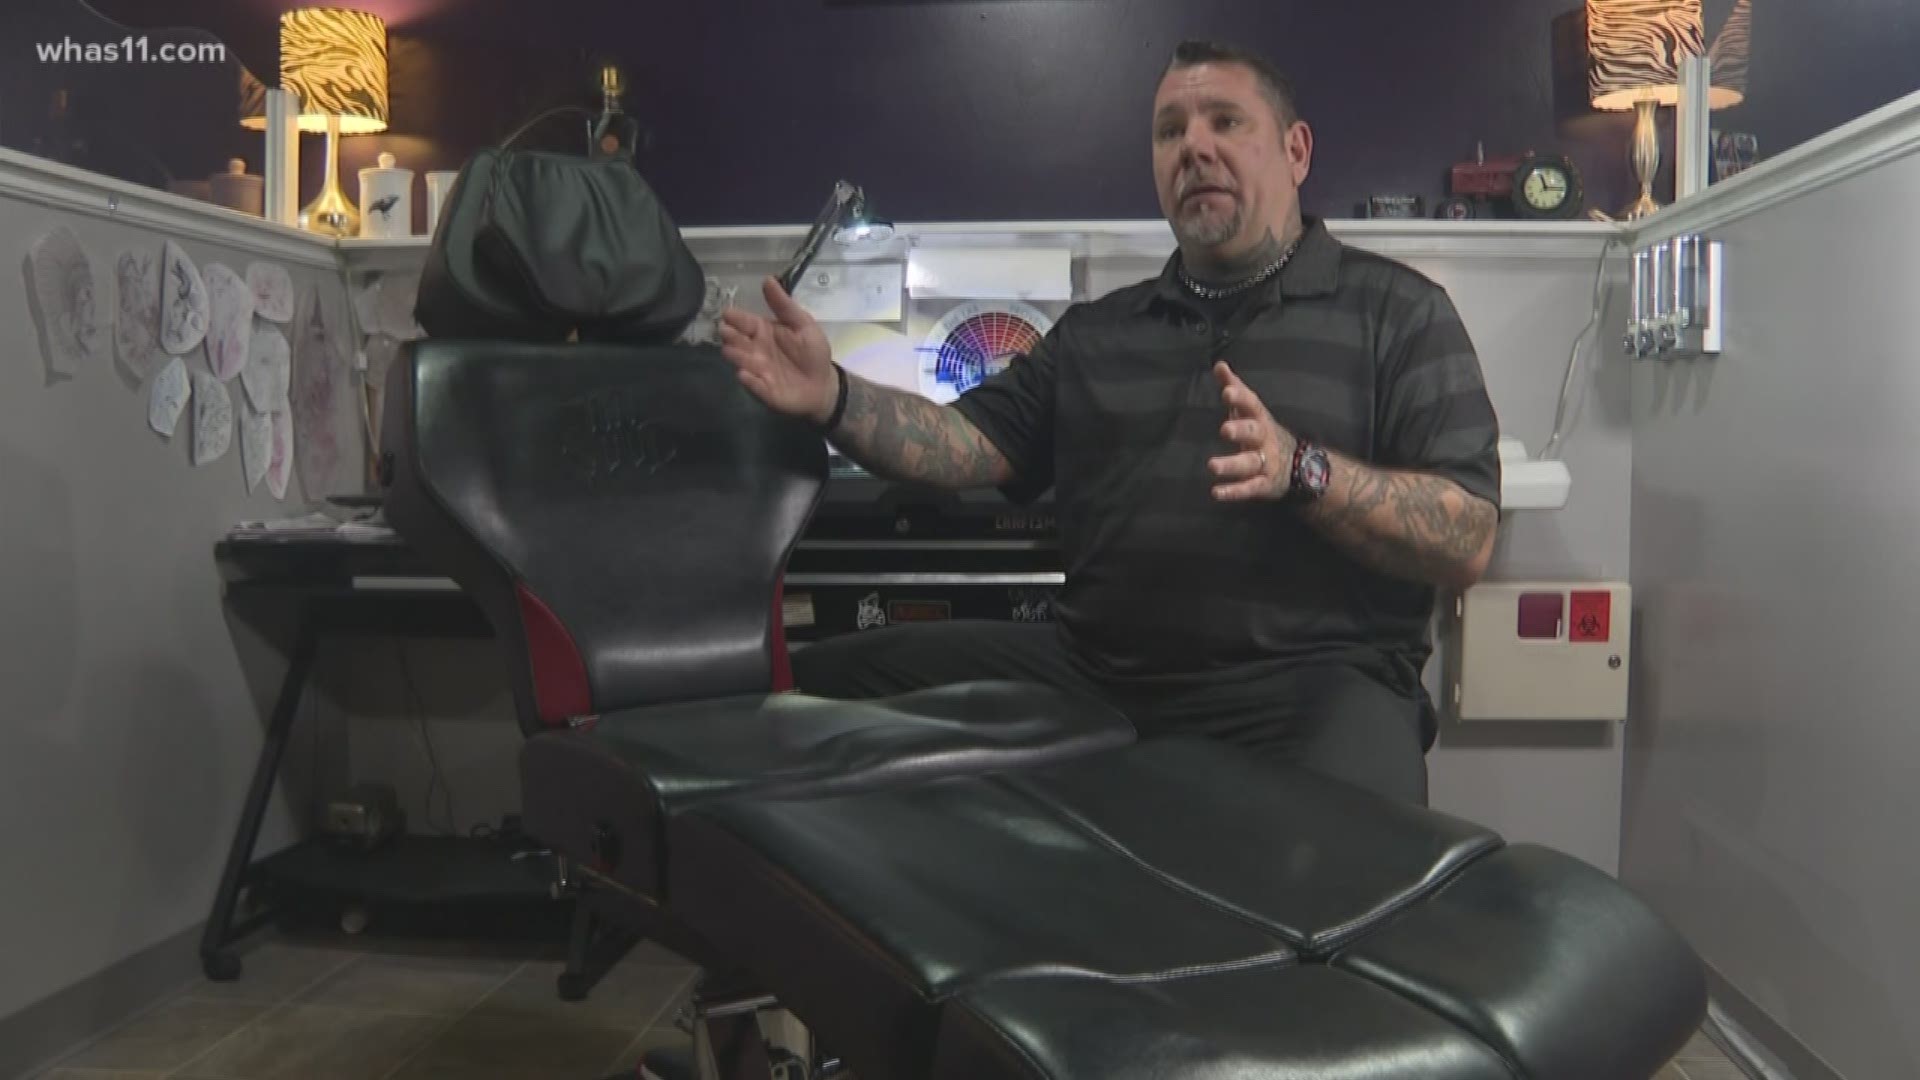 Tattoos have been helping breast cancer survivors cope with mastectomies and burn victims cover up scars, among others, but a new proposal in Kentucky could change that.